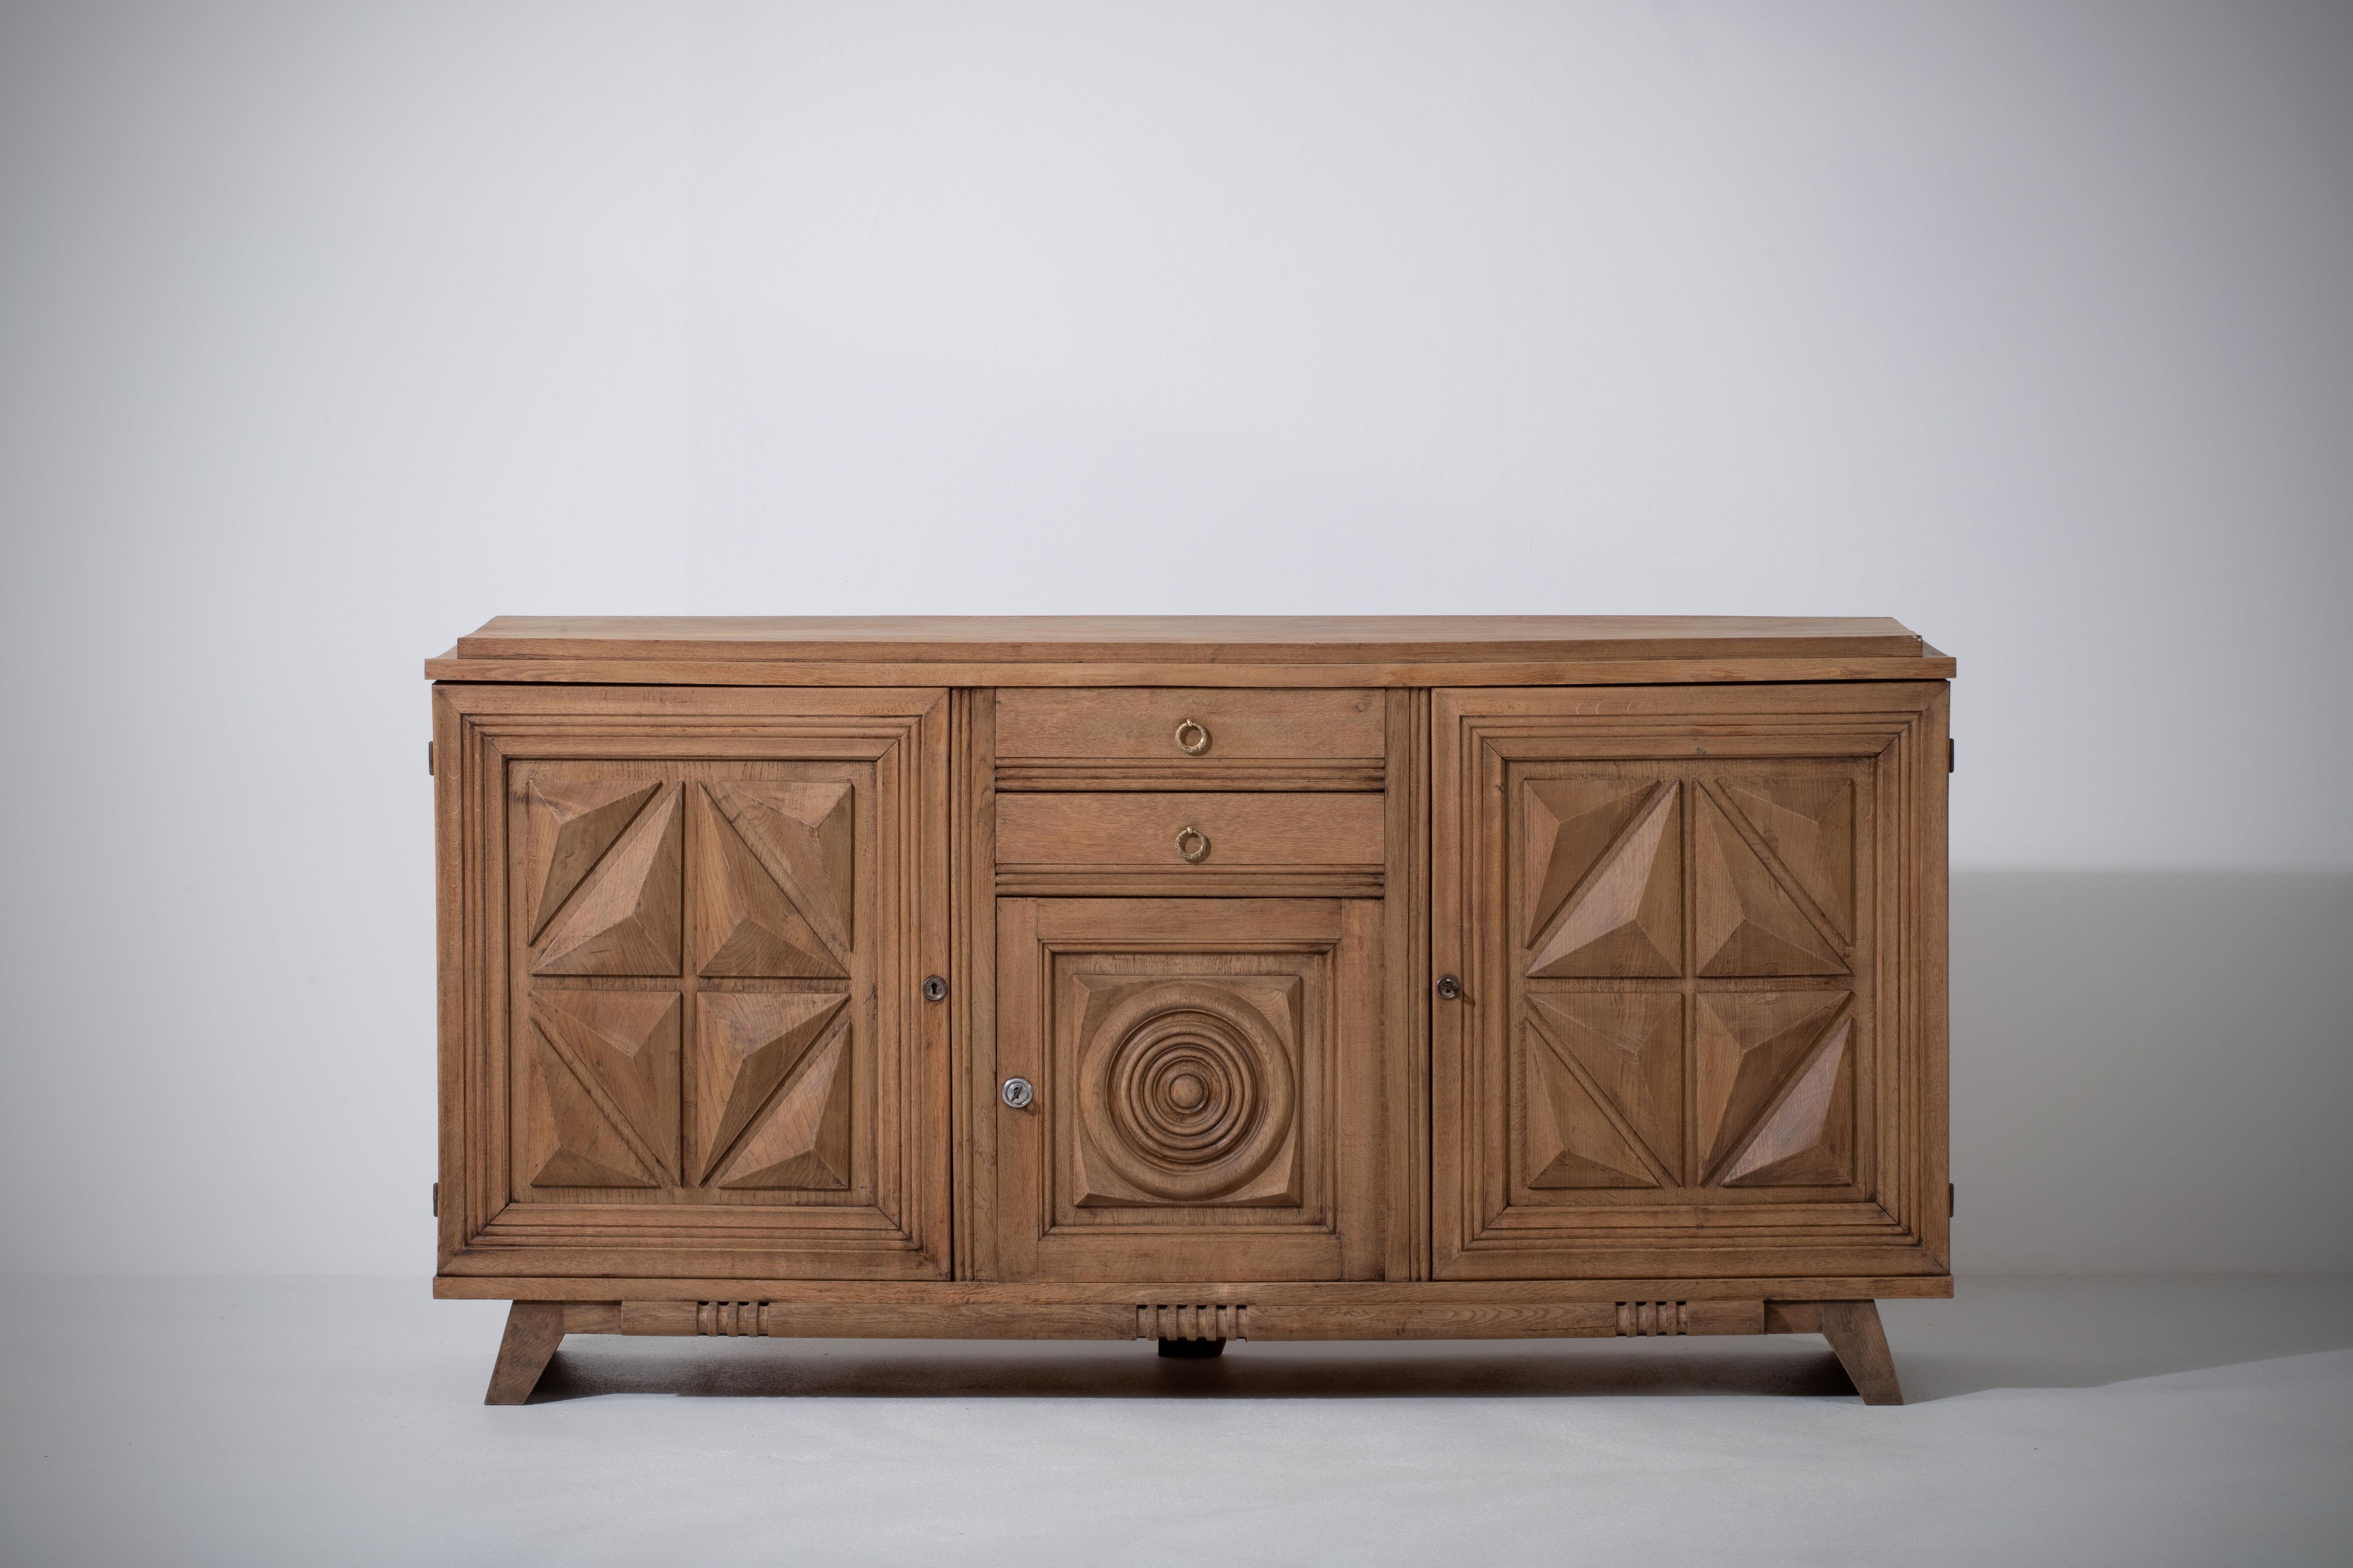 Credenza, solid oak, France, 1940s.
Art Deco Brutalist sideboard. 
The credenza consists of three storage facilities and covered with very detailed designed doors and in the center, a drawers column.